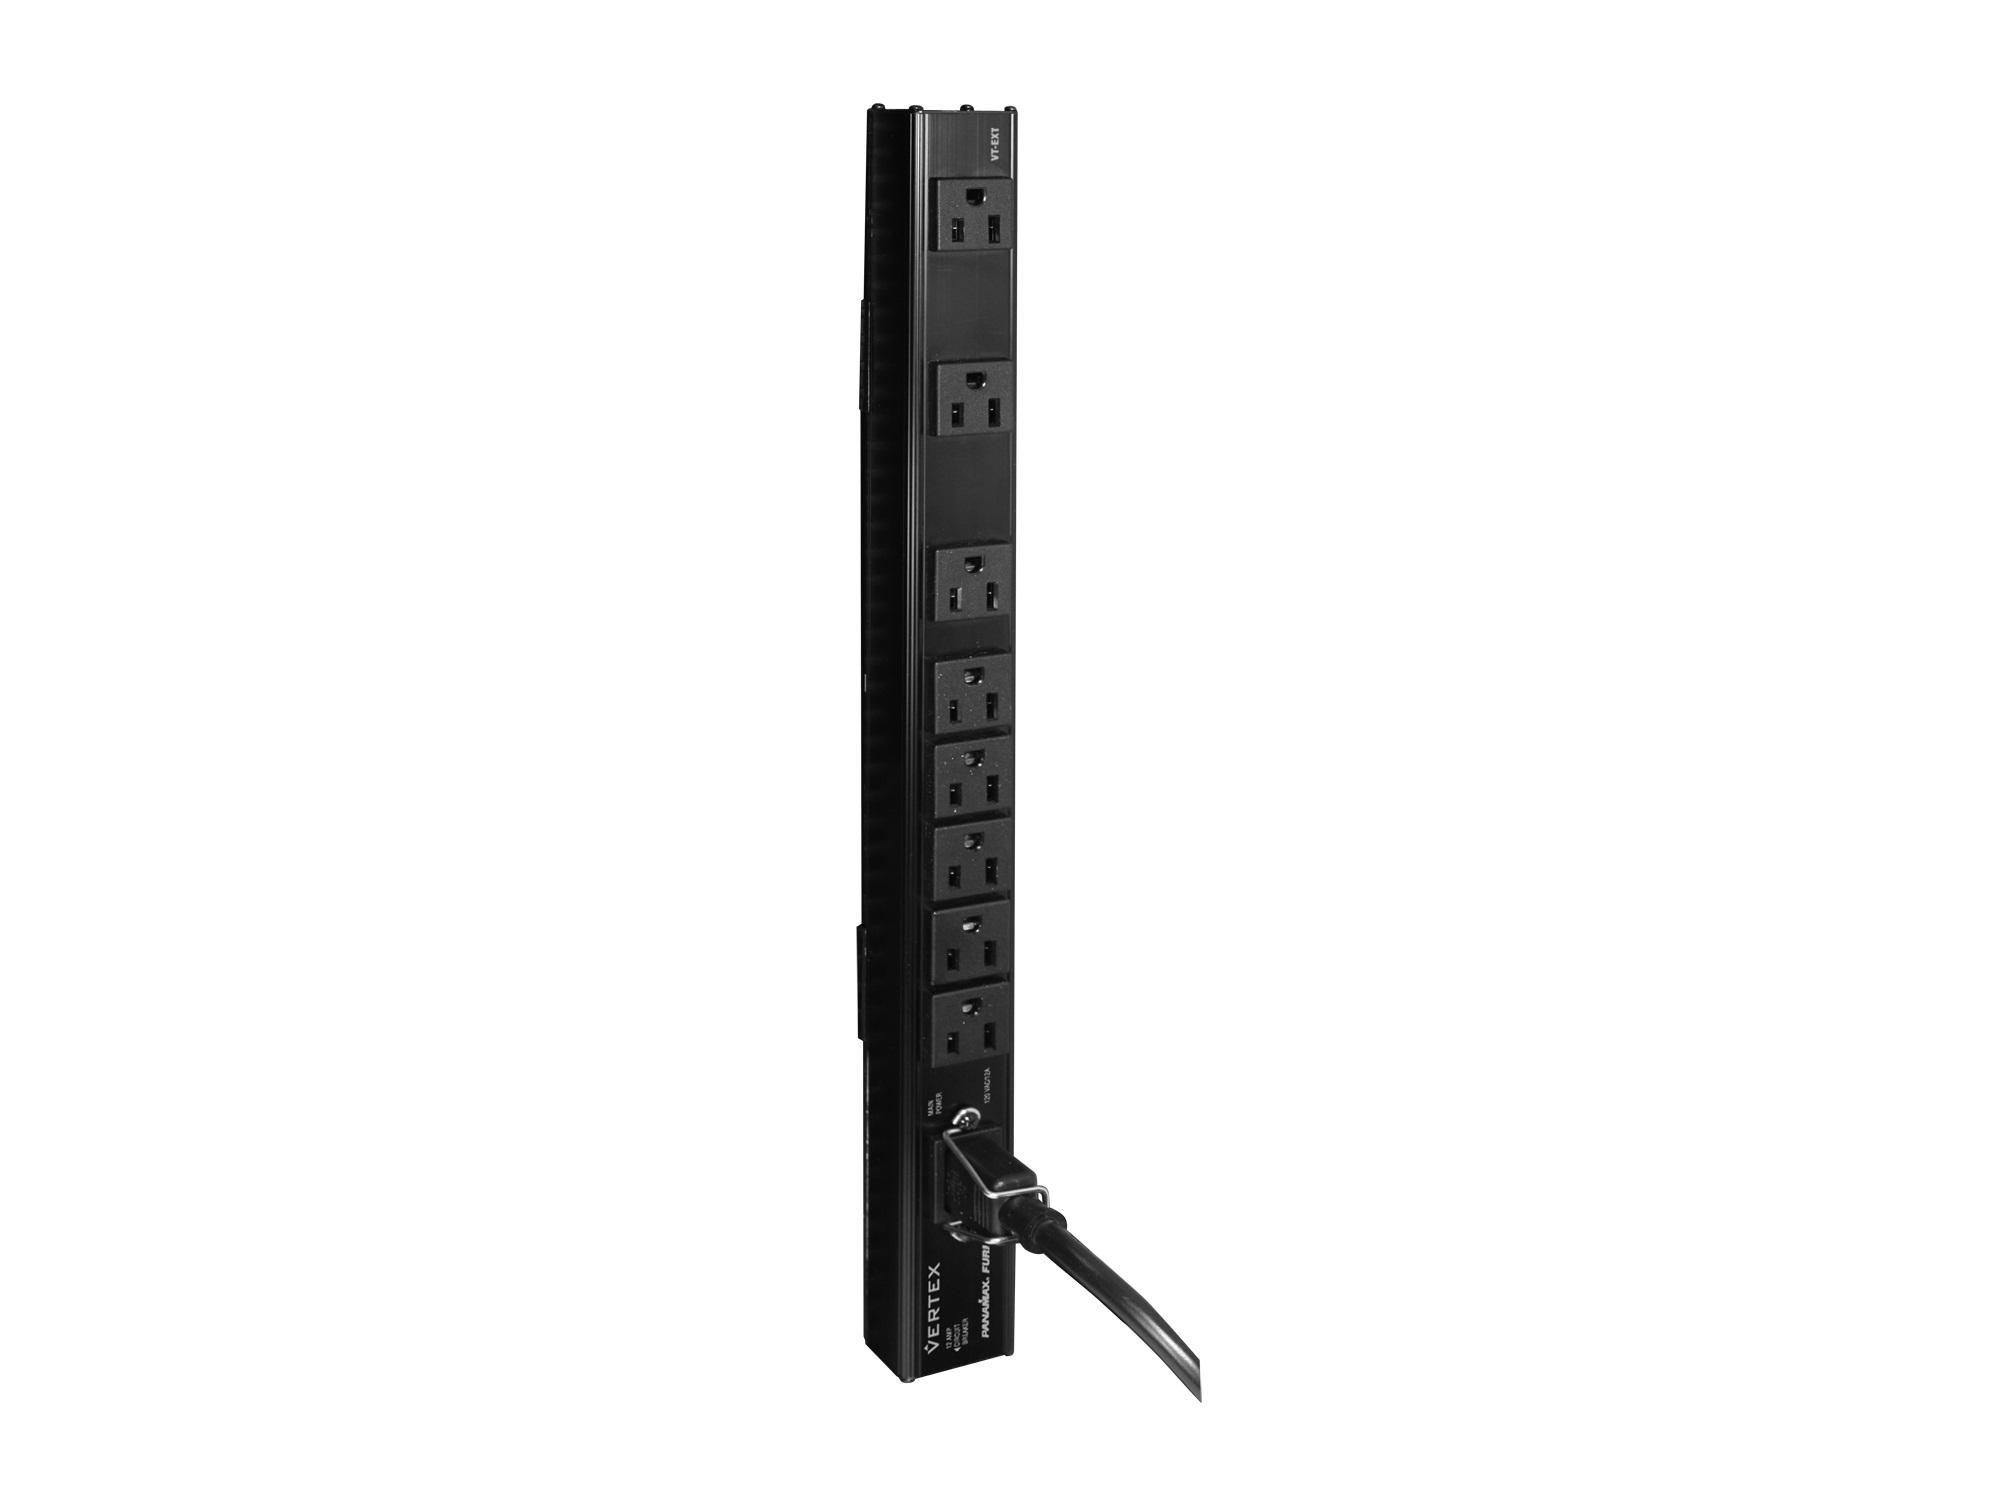 VT-EXT 8-Outlet Vertex Power Strip by Panamax